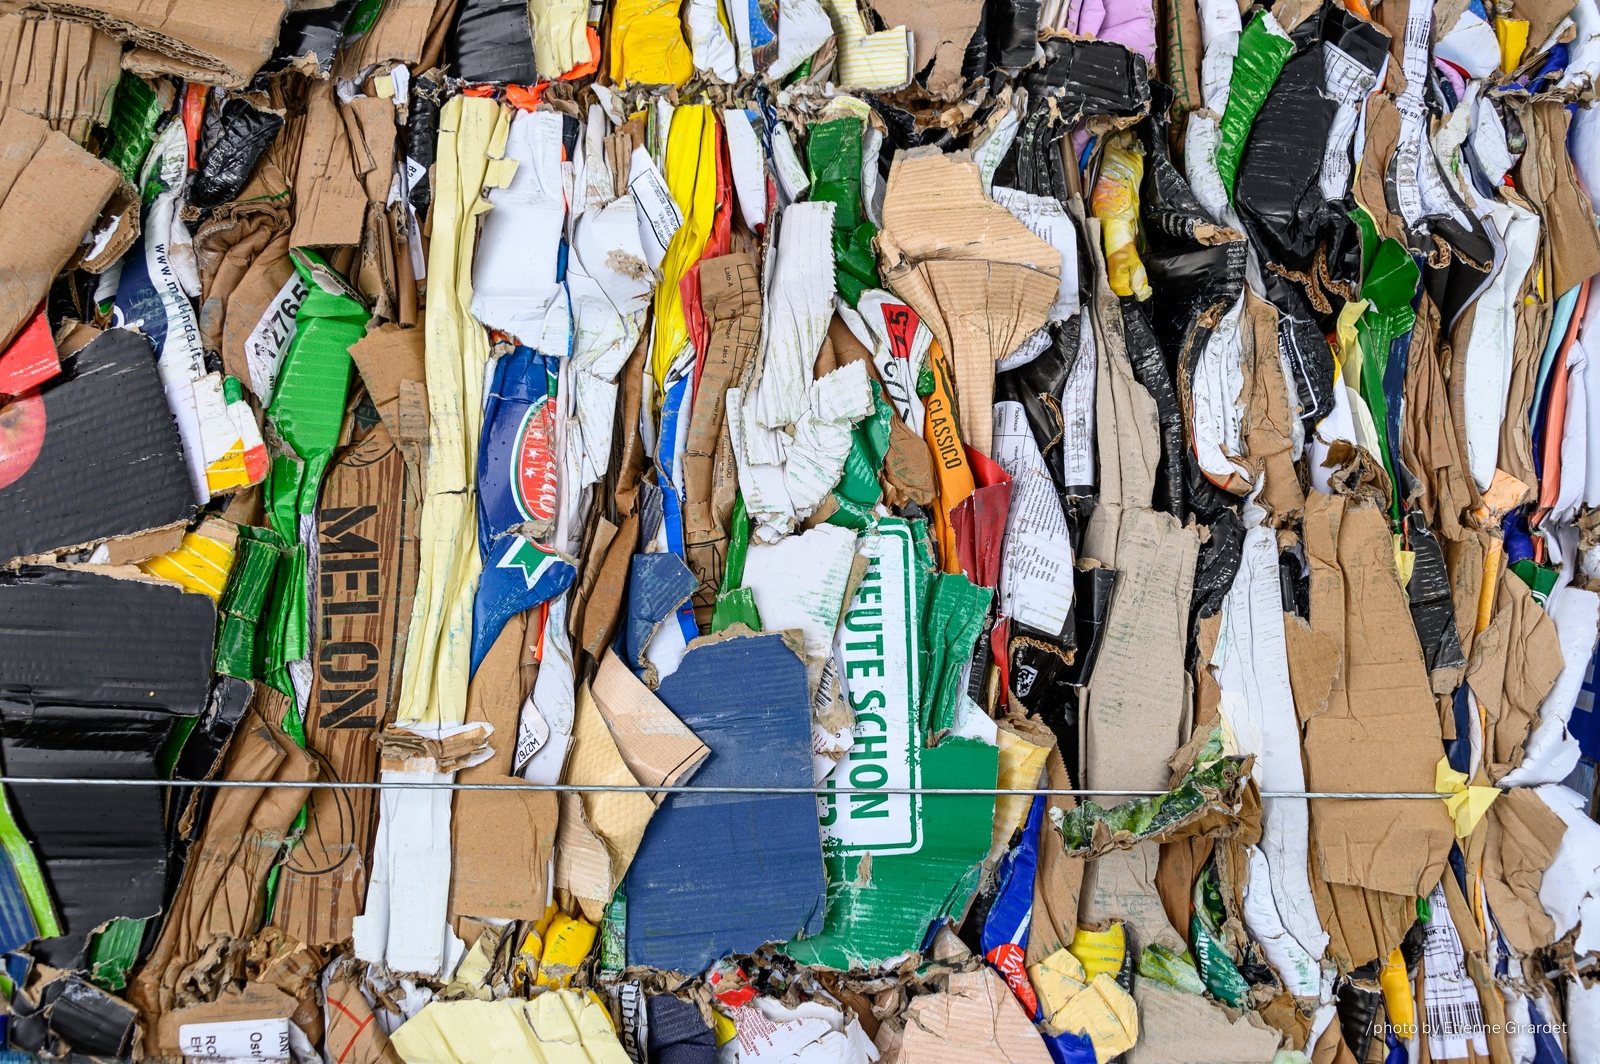 201904_24_ZZ6_1604-paper-waste-pressed-recycling-by-E-Girardet.jpg